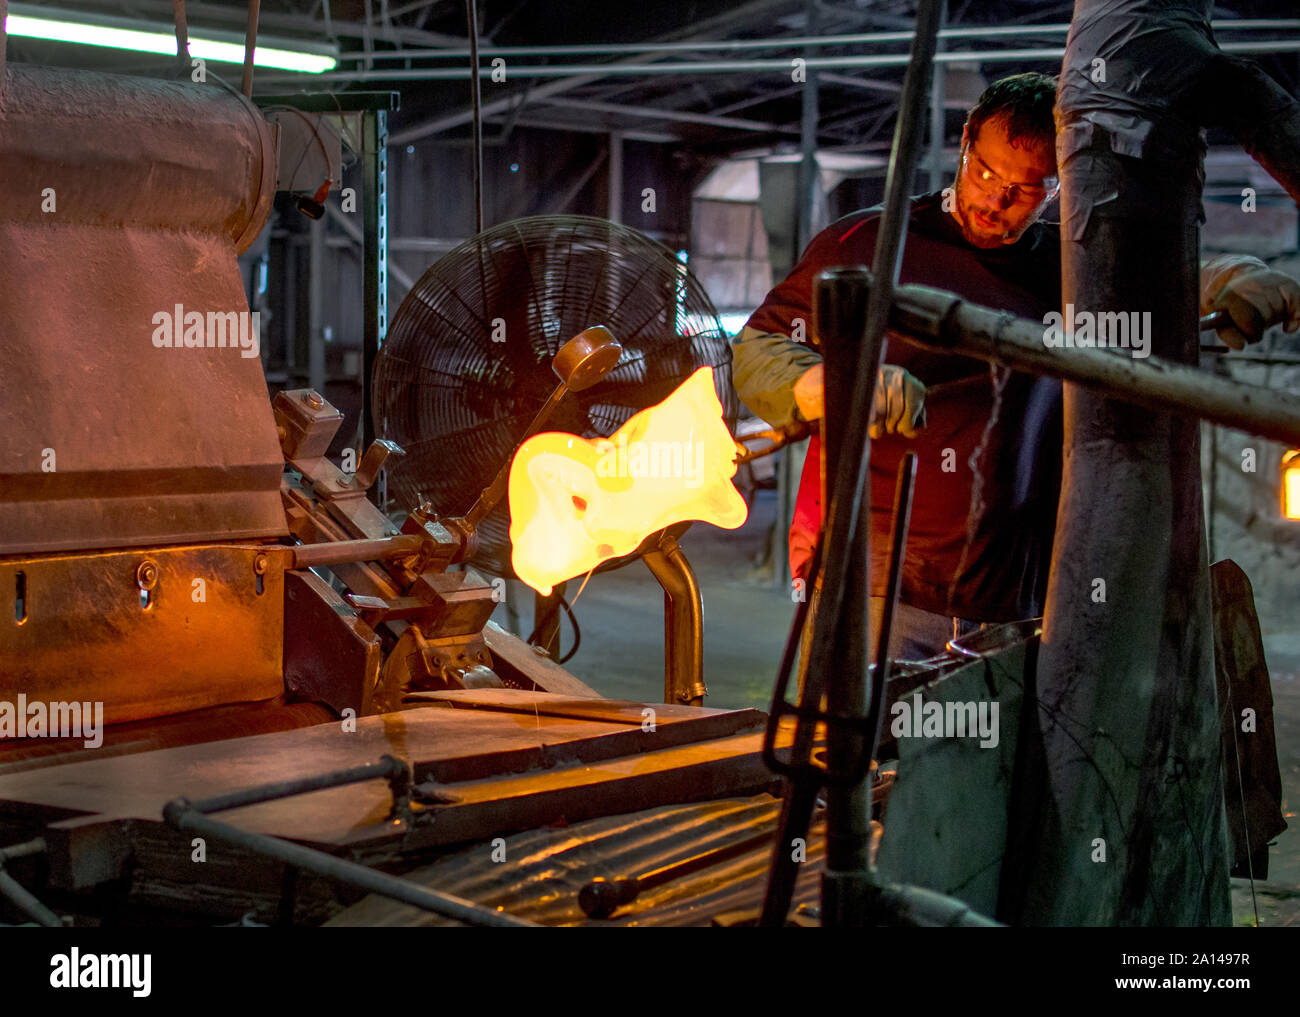 Sept 27 2019 Kokomo Indiana USA;a glass worker uses iron tools and heavy gloves to lift p a pile of molten glass. he then mixes and swirls the colors Stock Photo